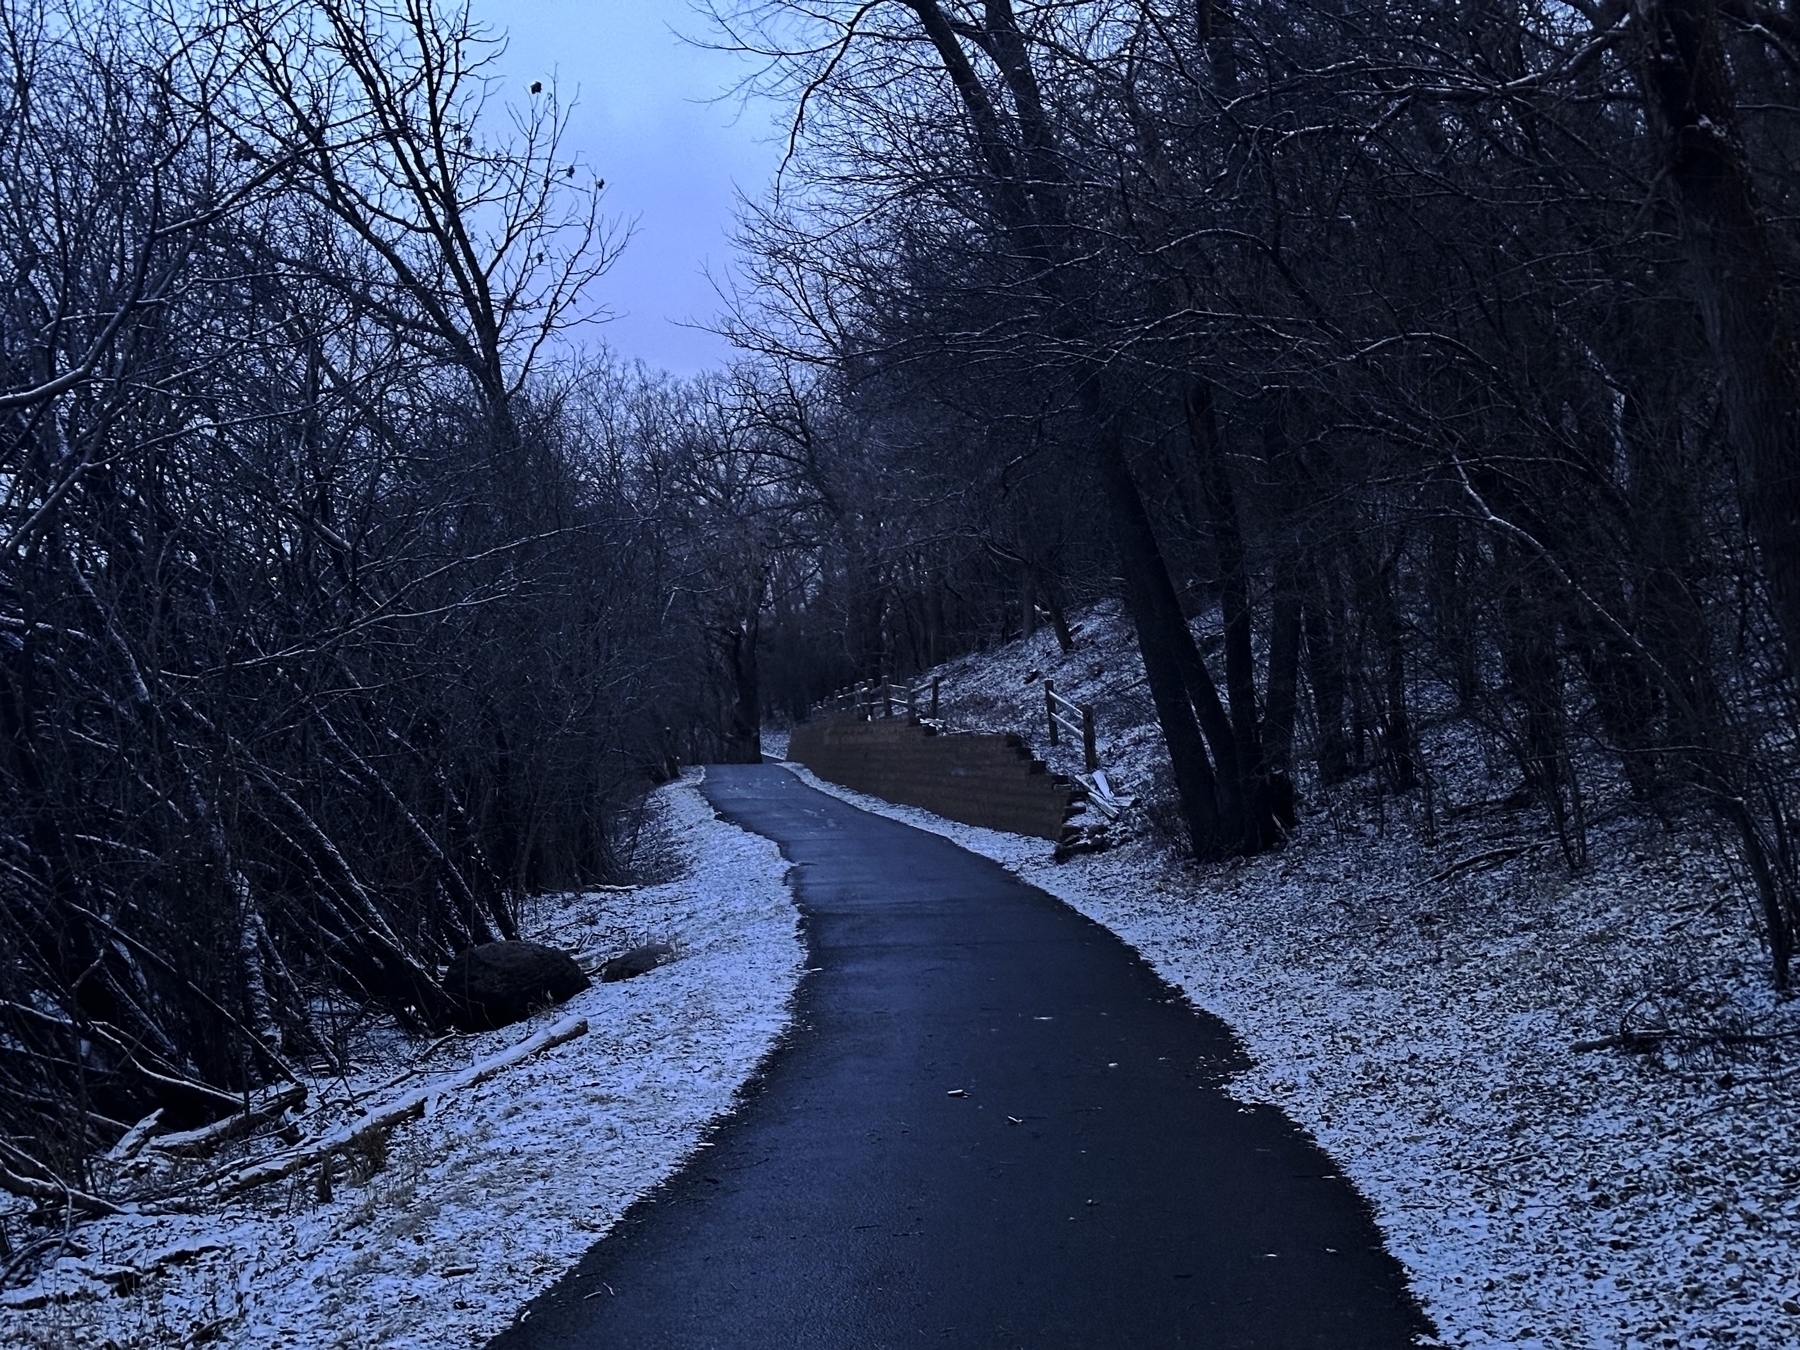 A winding pathway dusted with snow meanders through bare trees; the atmosphere is dusk-tinted and serene.